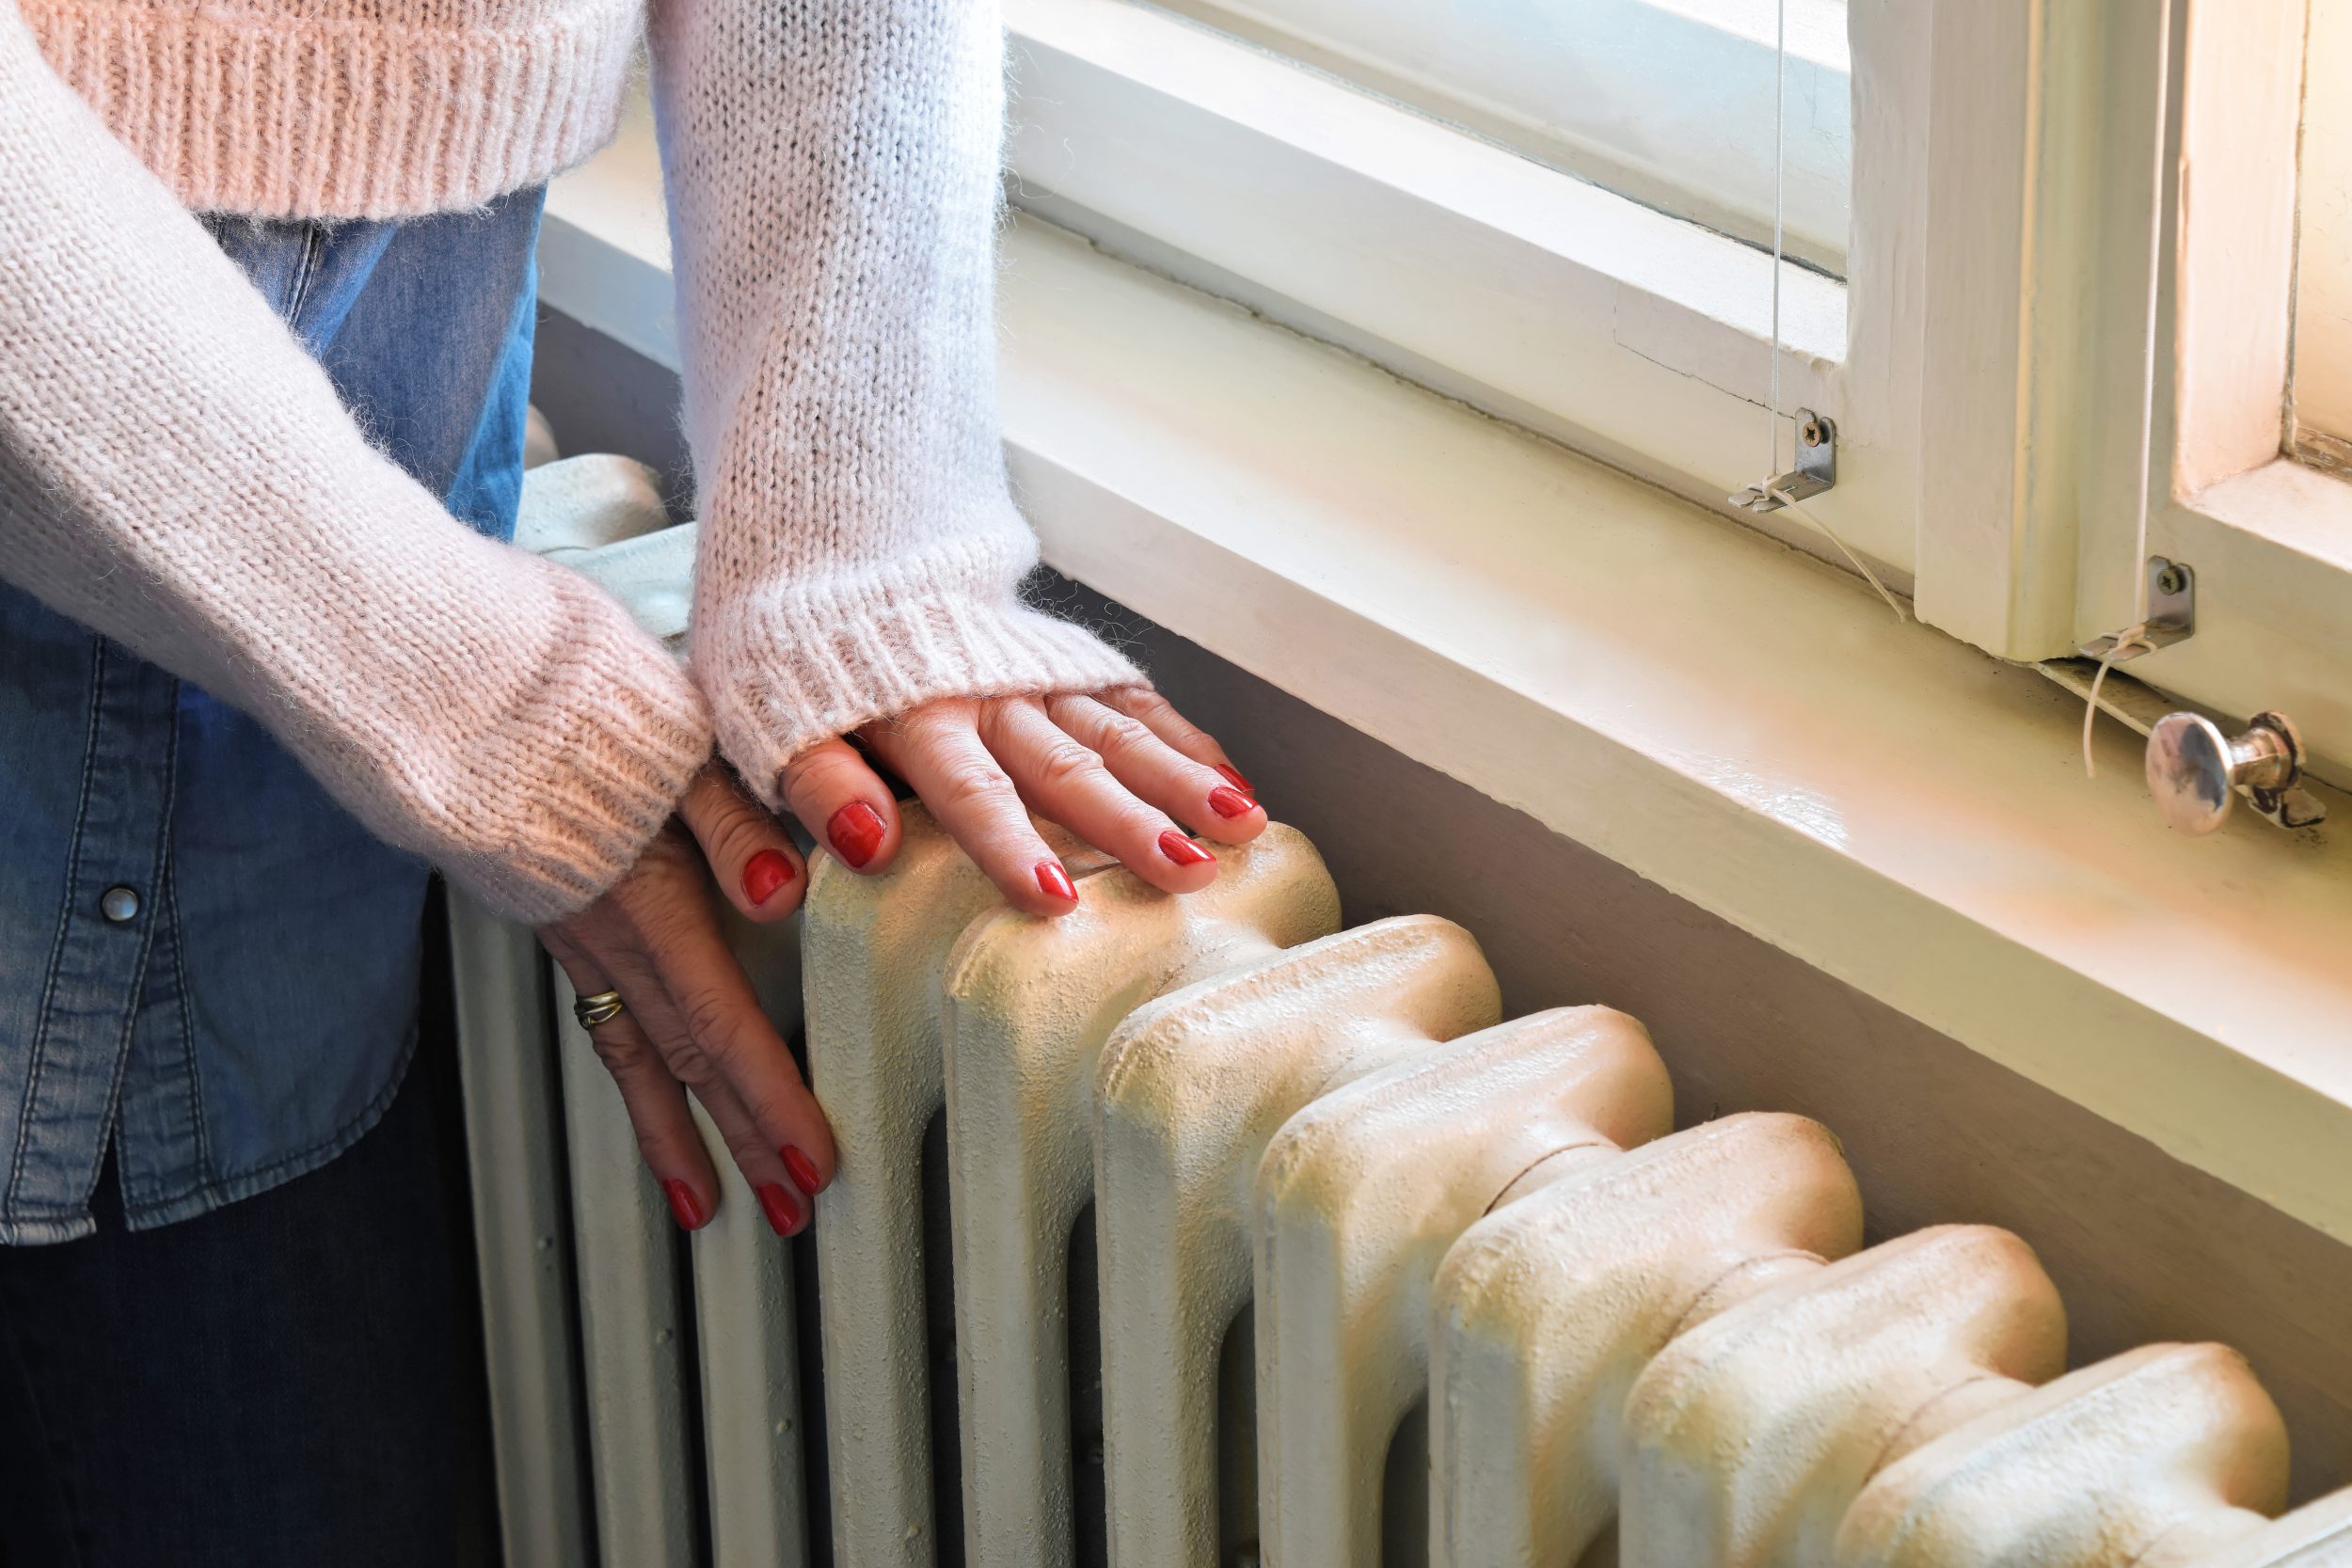 woman with hands on a radiator